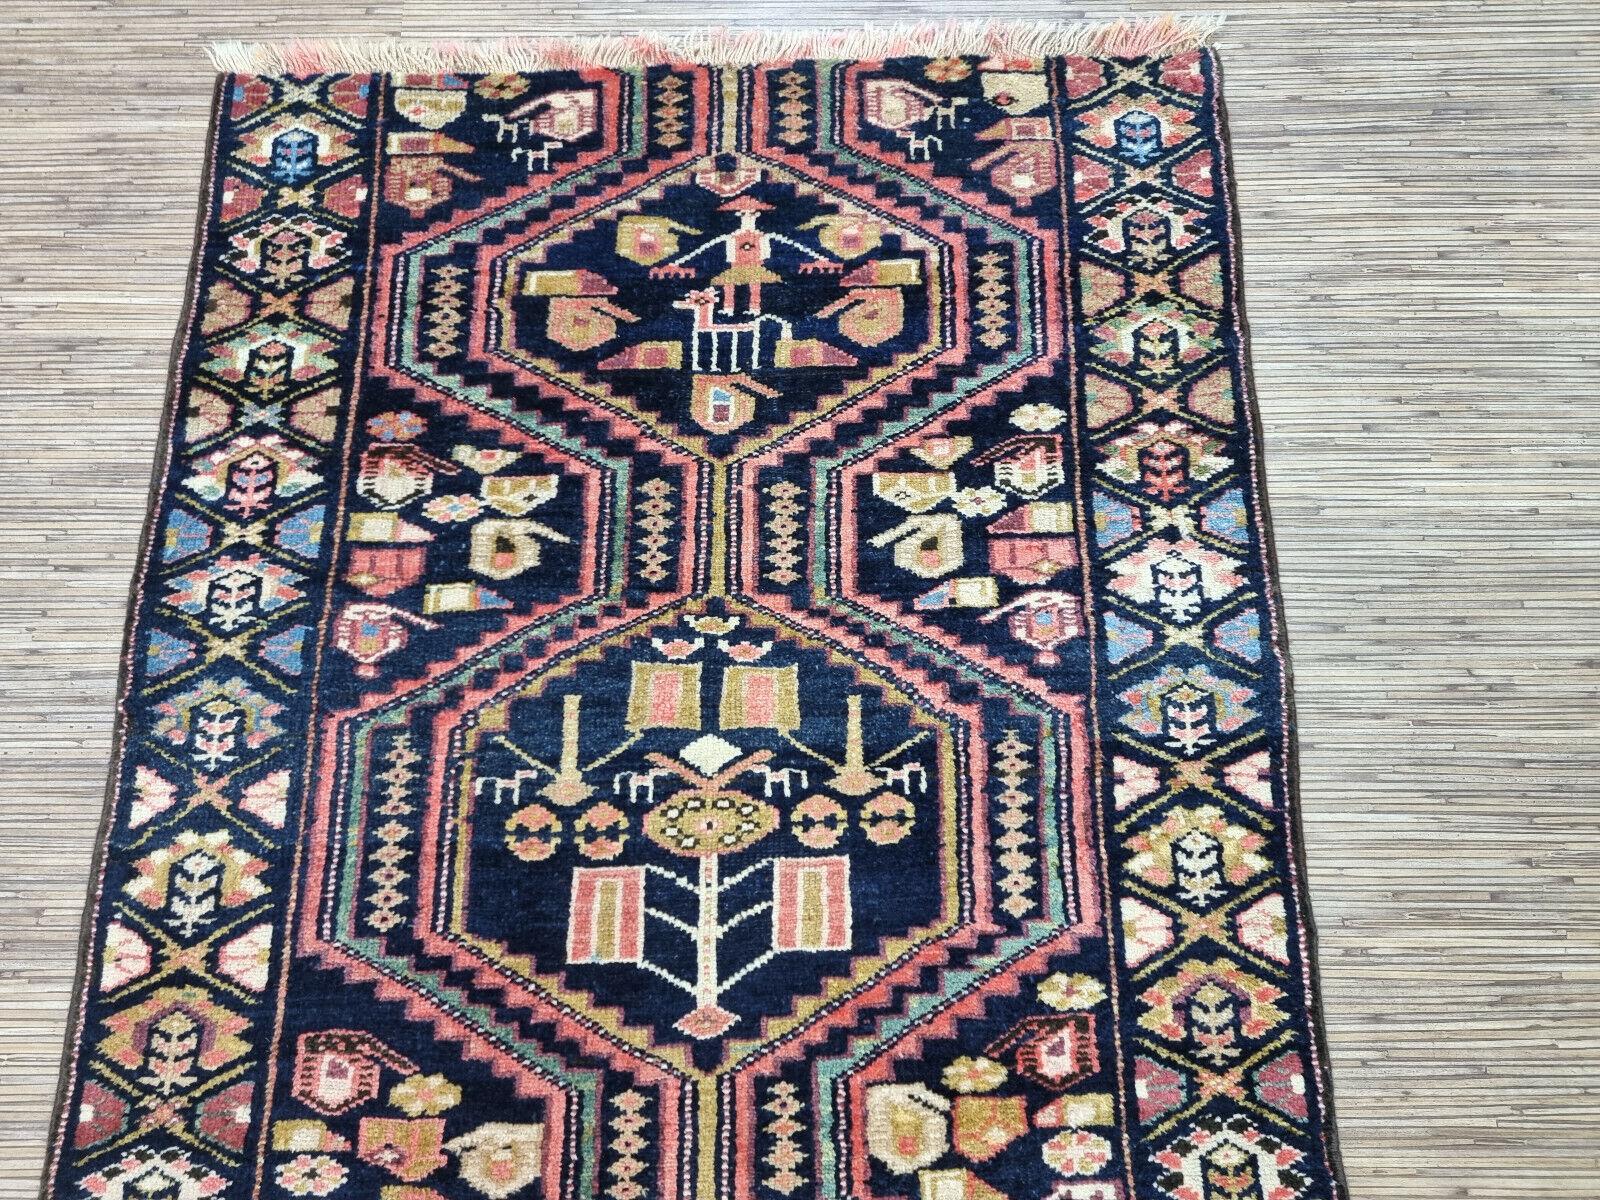 Early 20th Century Handmade Antique Persian Style Luri Runner Rug 3.2' x 9.1', 1920s - 1D103